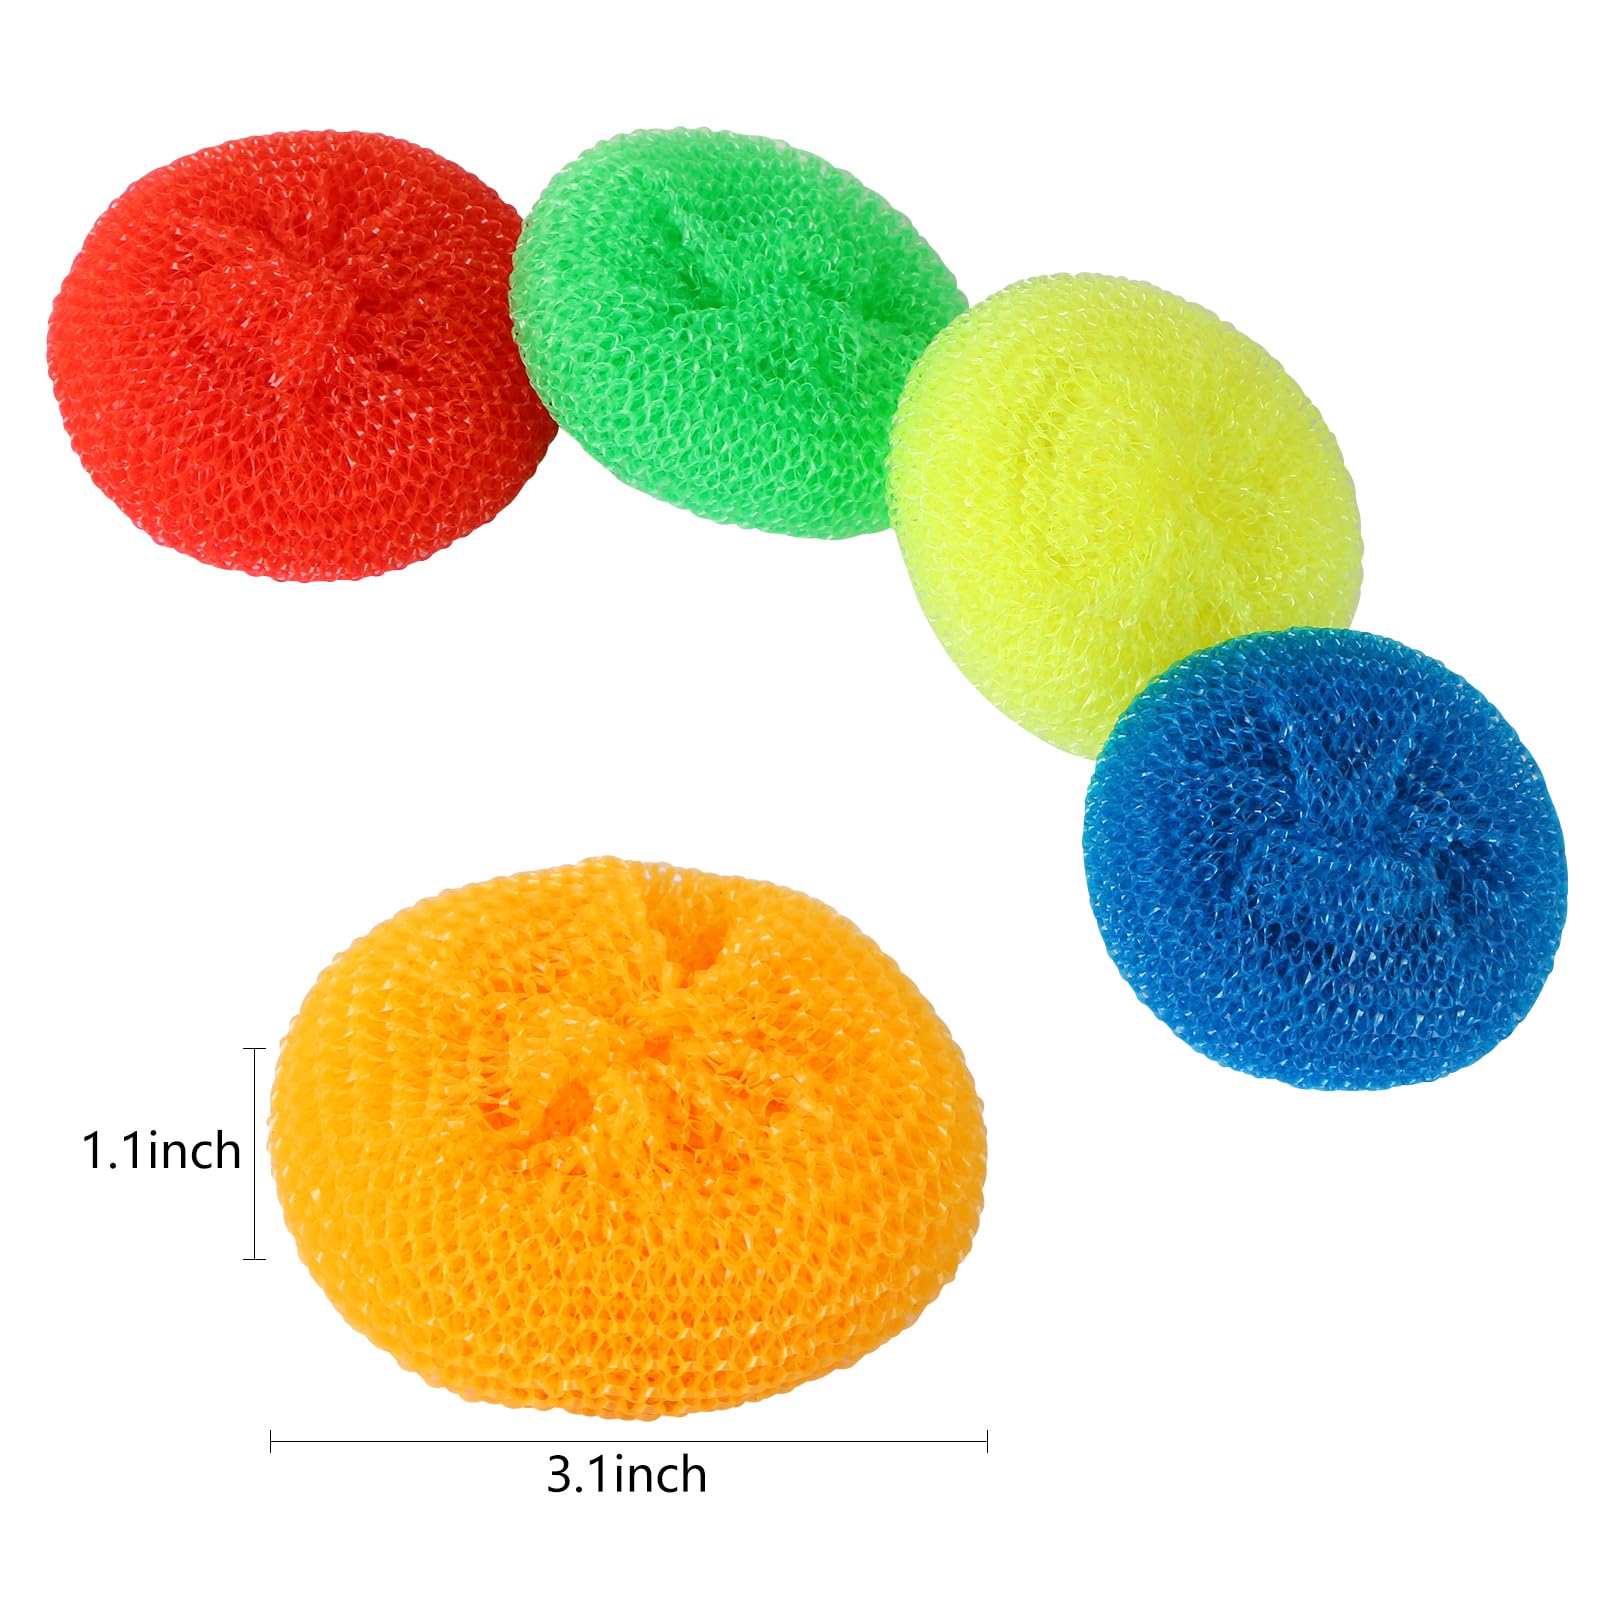 MIDELONG Plastic Dish Scrubbers for Dishes Plastic Pot Round Scrubber Scouring Non Scratch Dish Scourers, Assorted Colors Poly Mesh Scouring Dish Brush Pads for Kitchen Cleaning, 5 Pcs